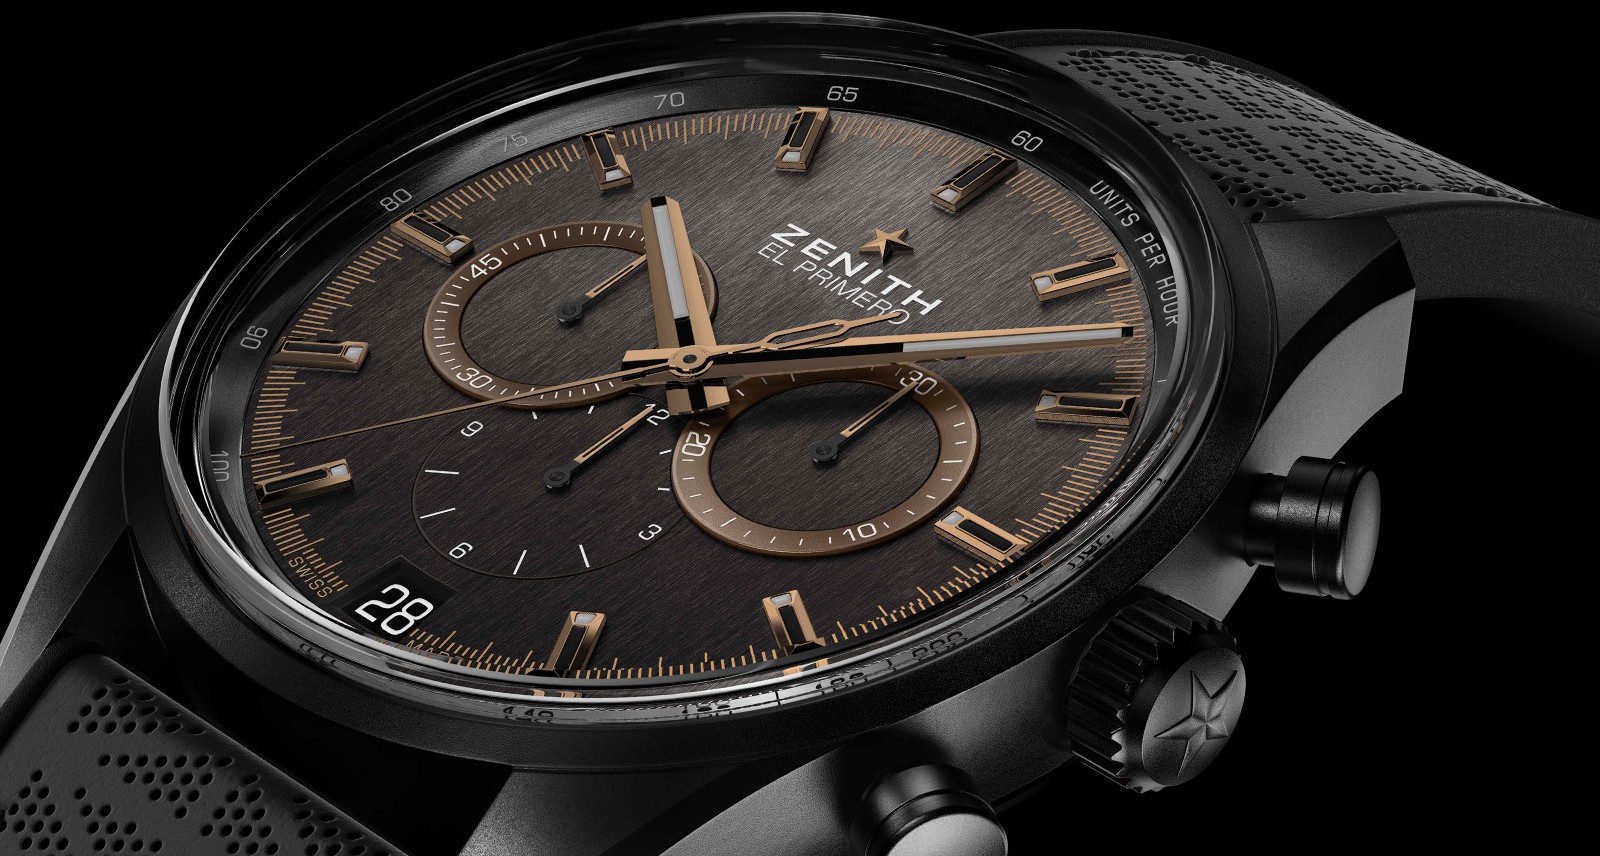 Zenith and Range Rover Teamed Up for a Stunning Special Edition Chronograph